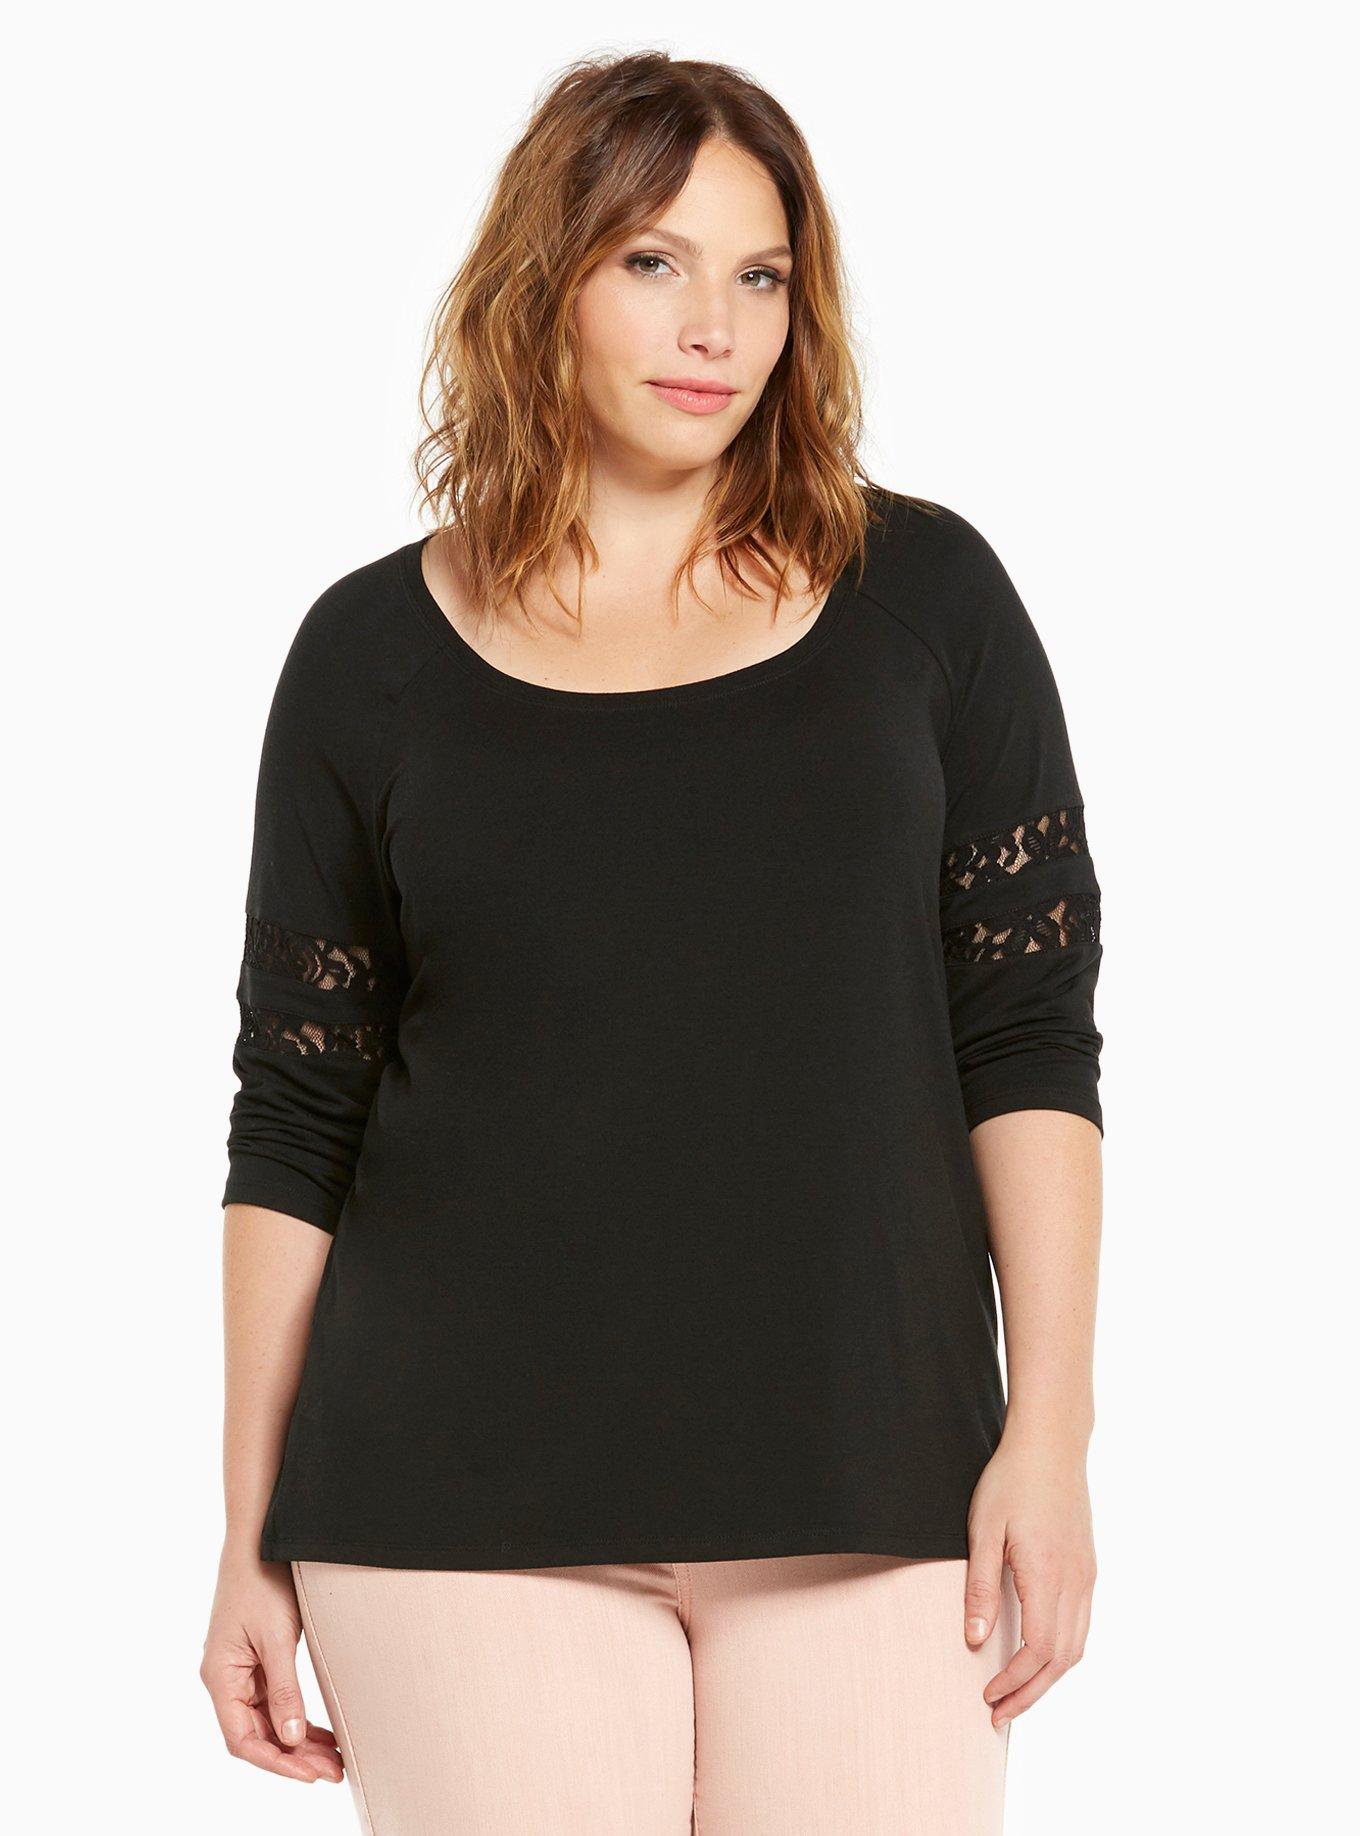 Plus Size - Lace Inset Football Tee - Torrid